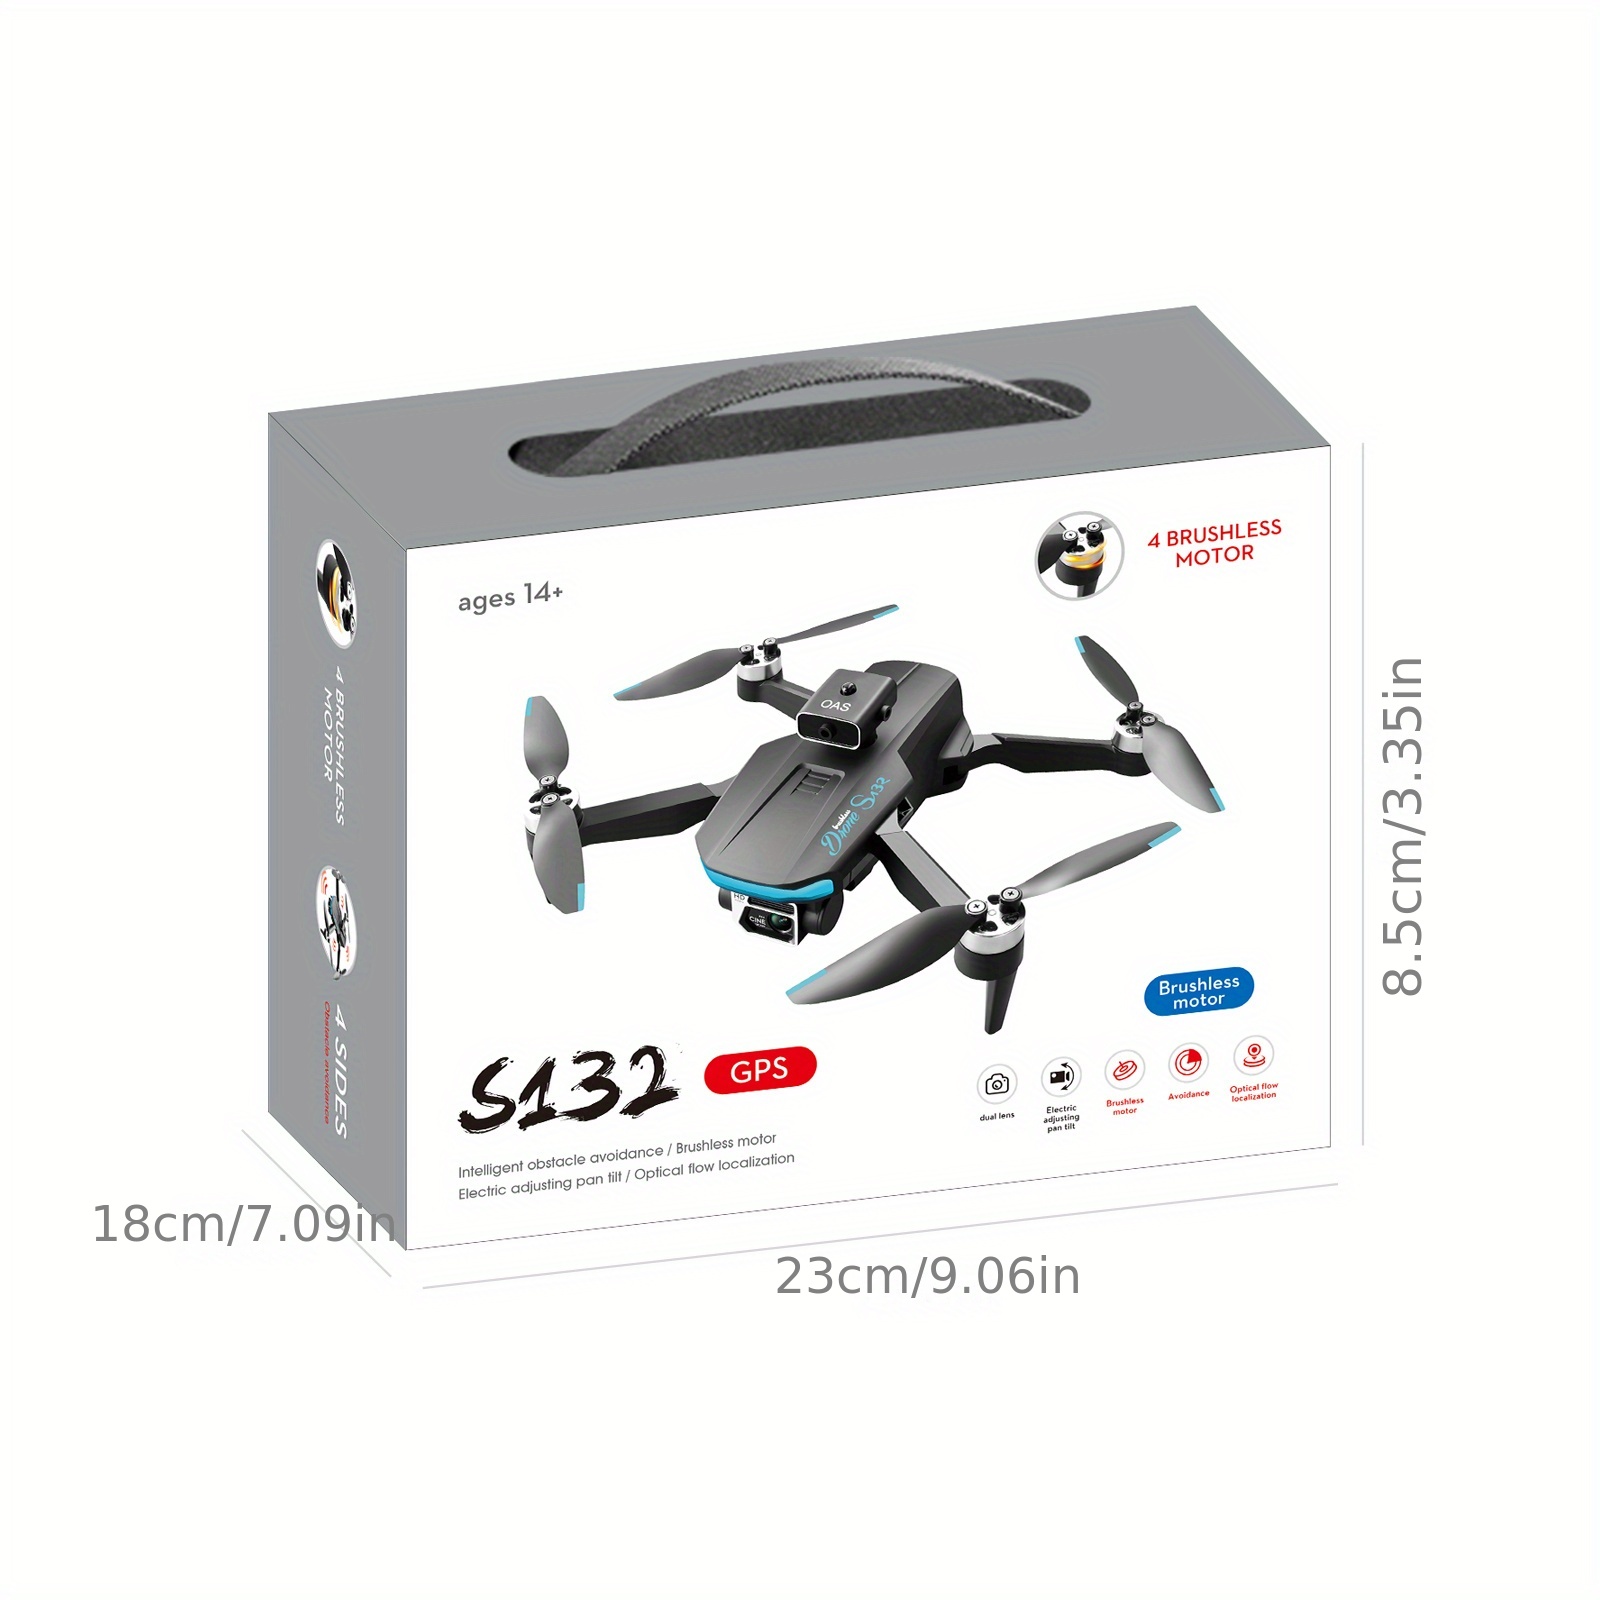 gps positioning aerial photography drone s132 2000m control range brushless motor optical flow positioning 5g wifi transmission obstacle avoidance perfect toy gift for adults kids details 13